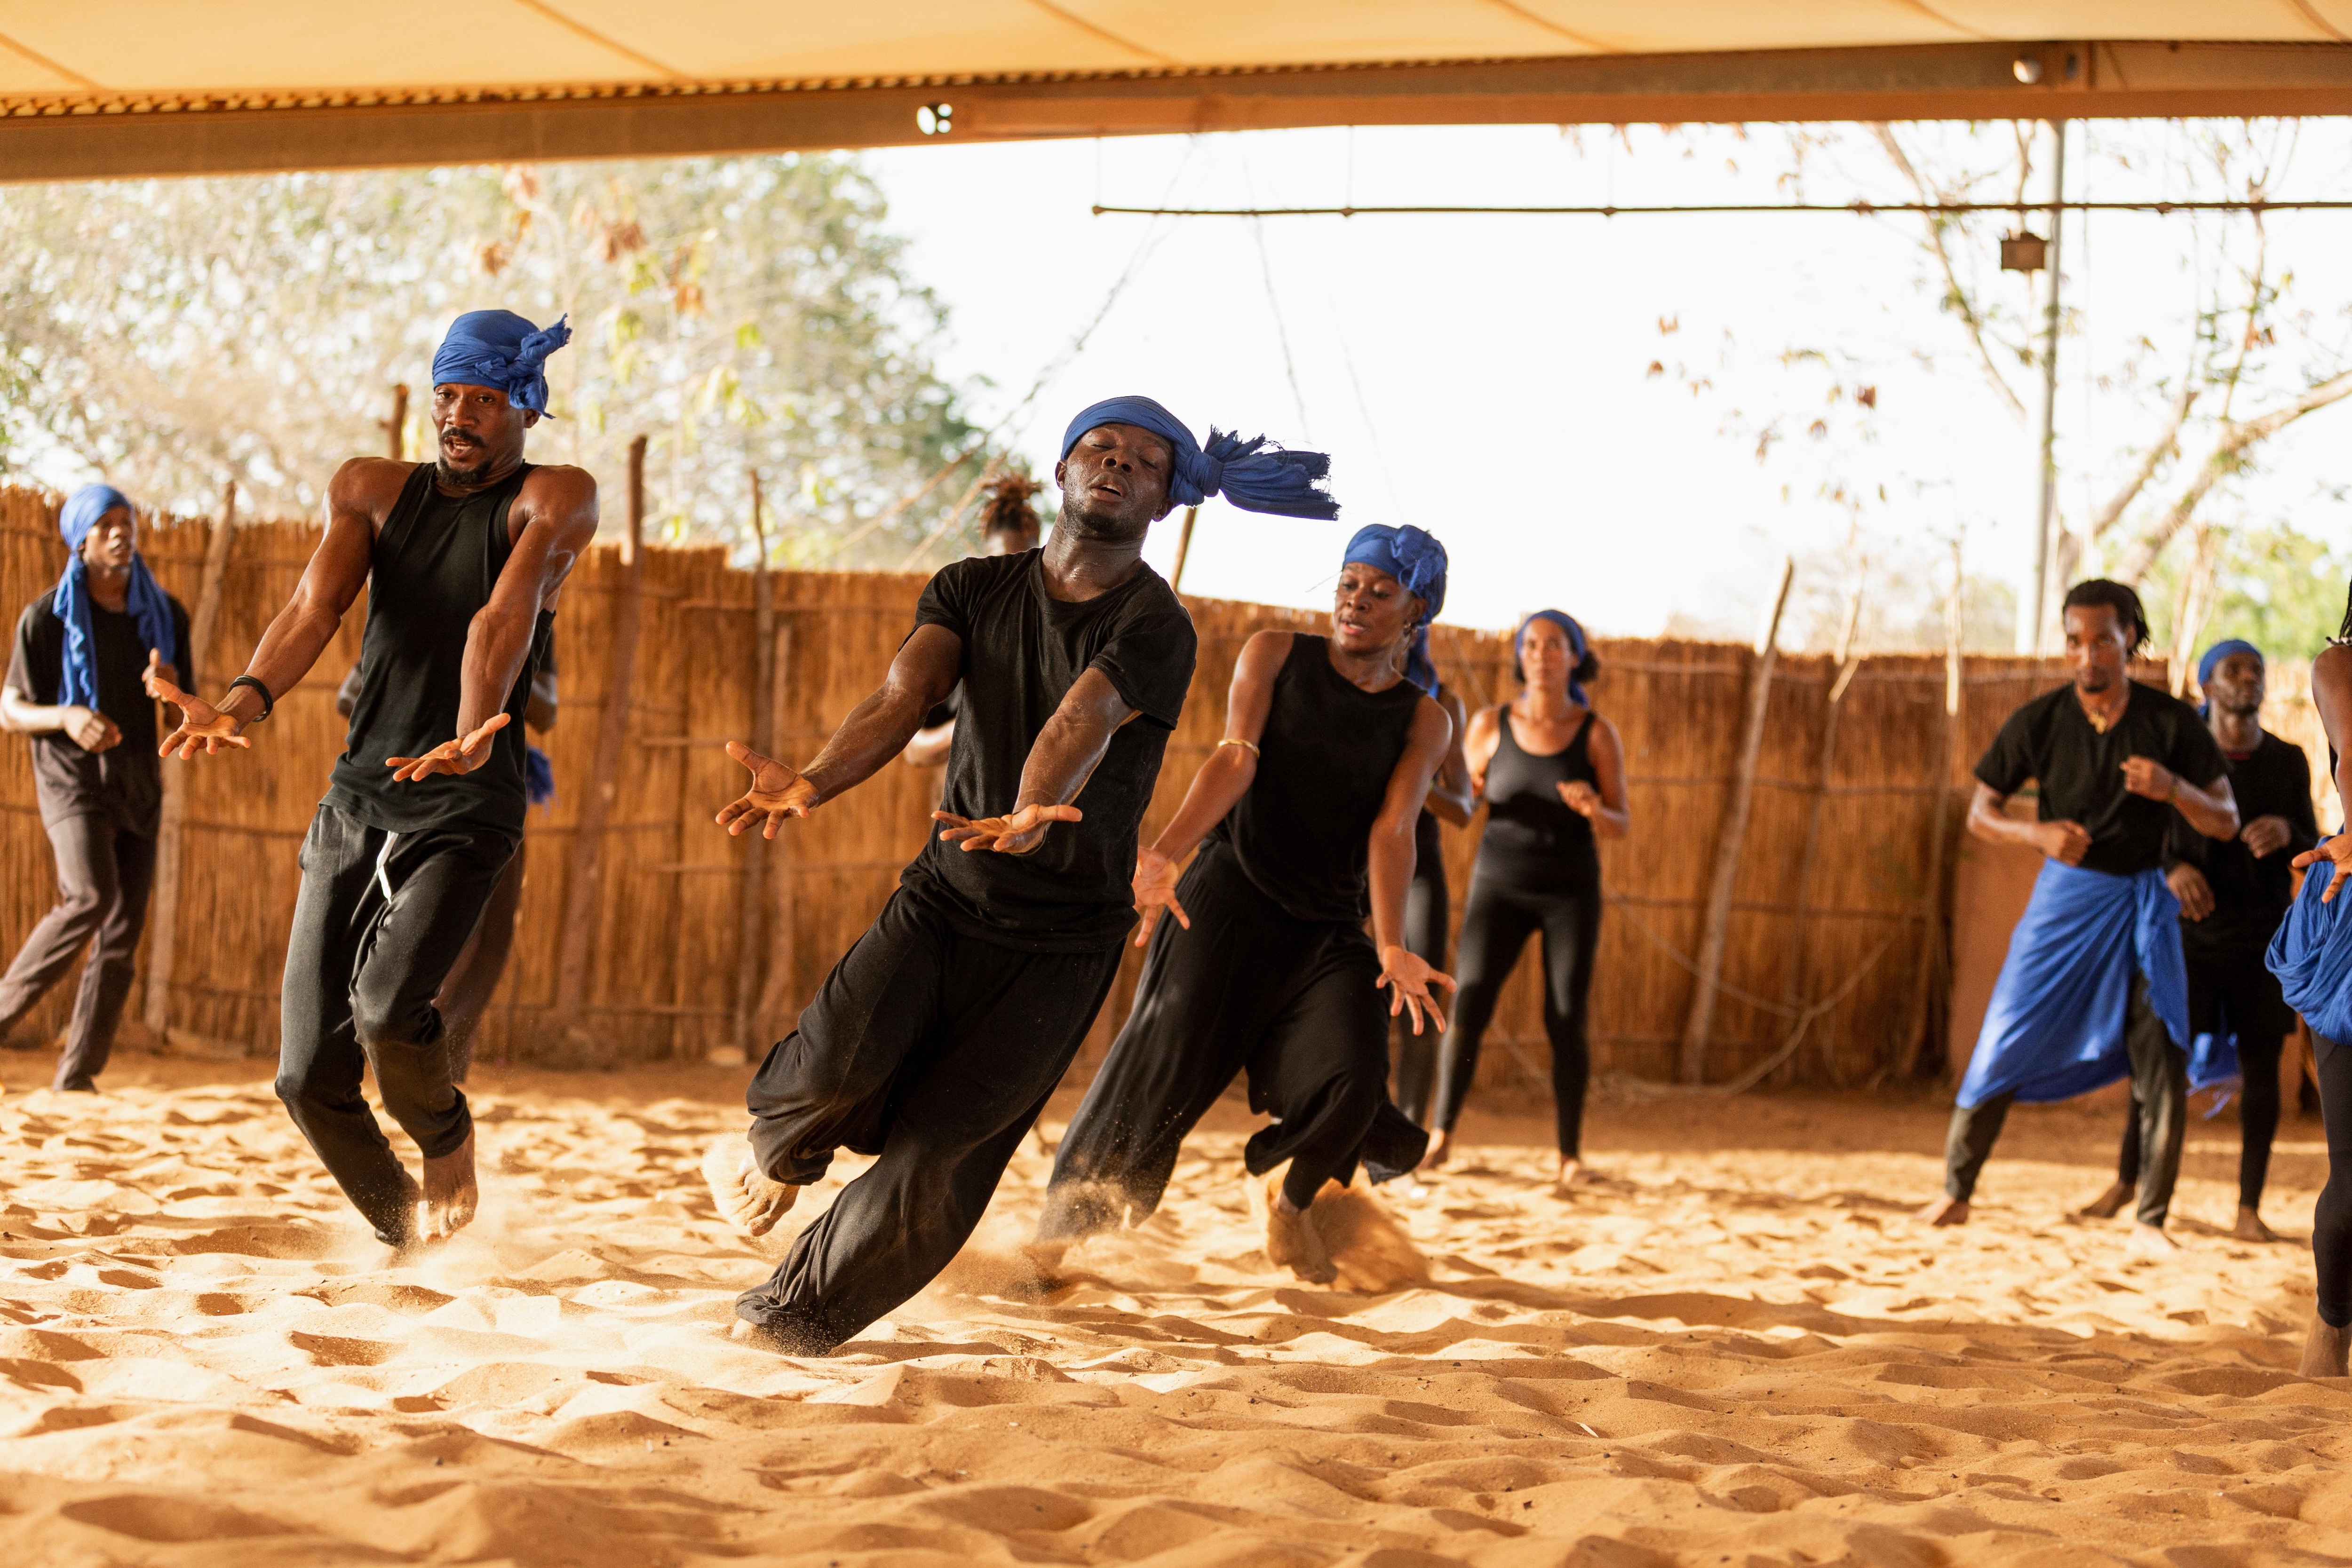 Dancers in movement with a blue scarf on their head, hands opened in front of them